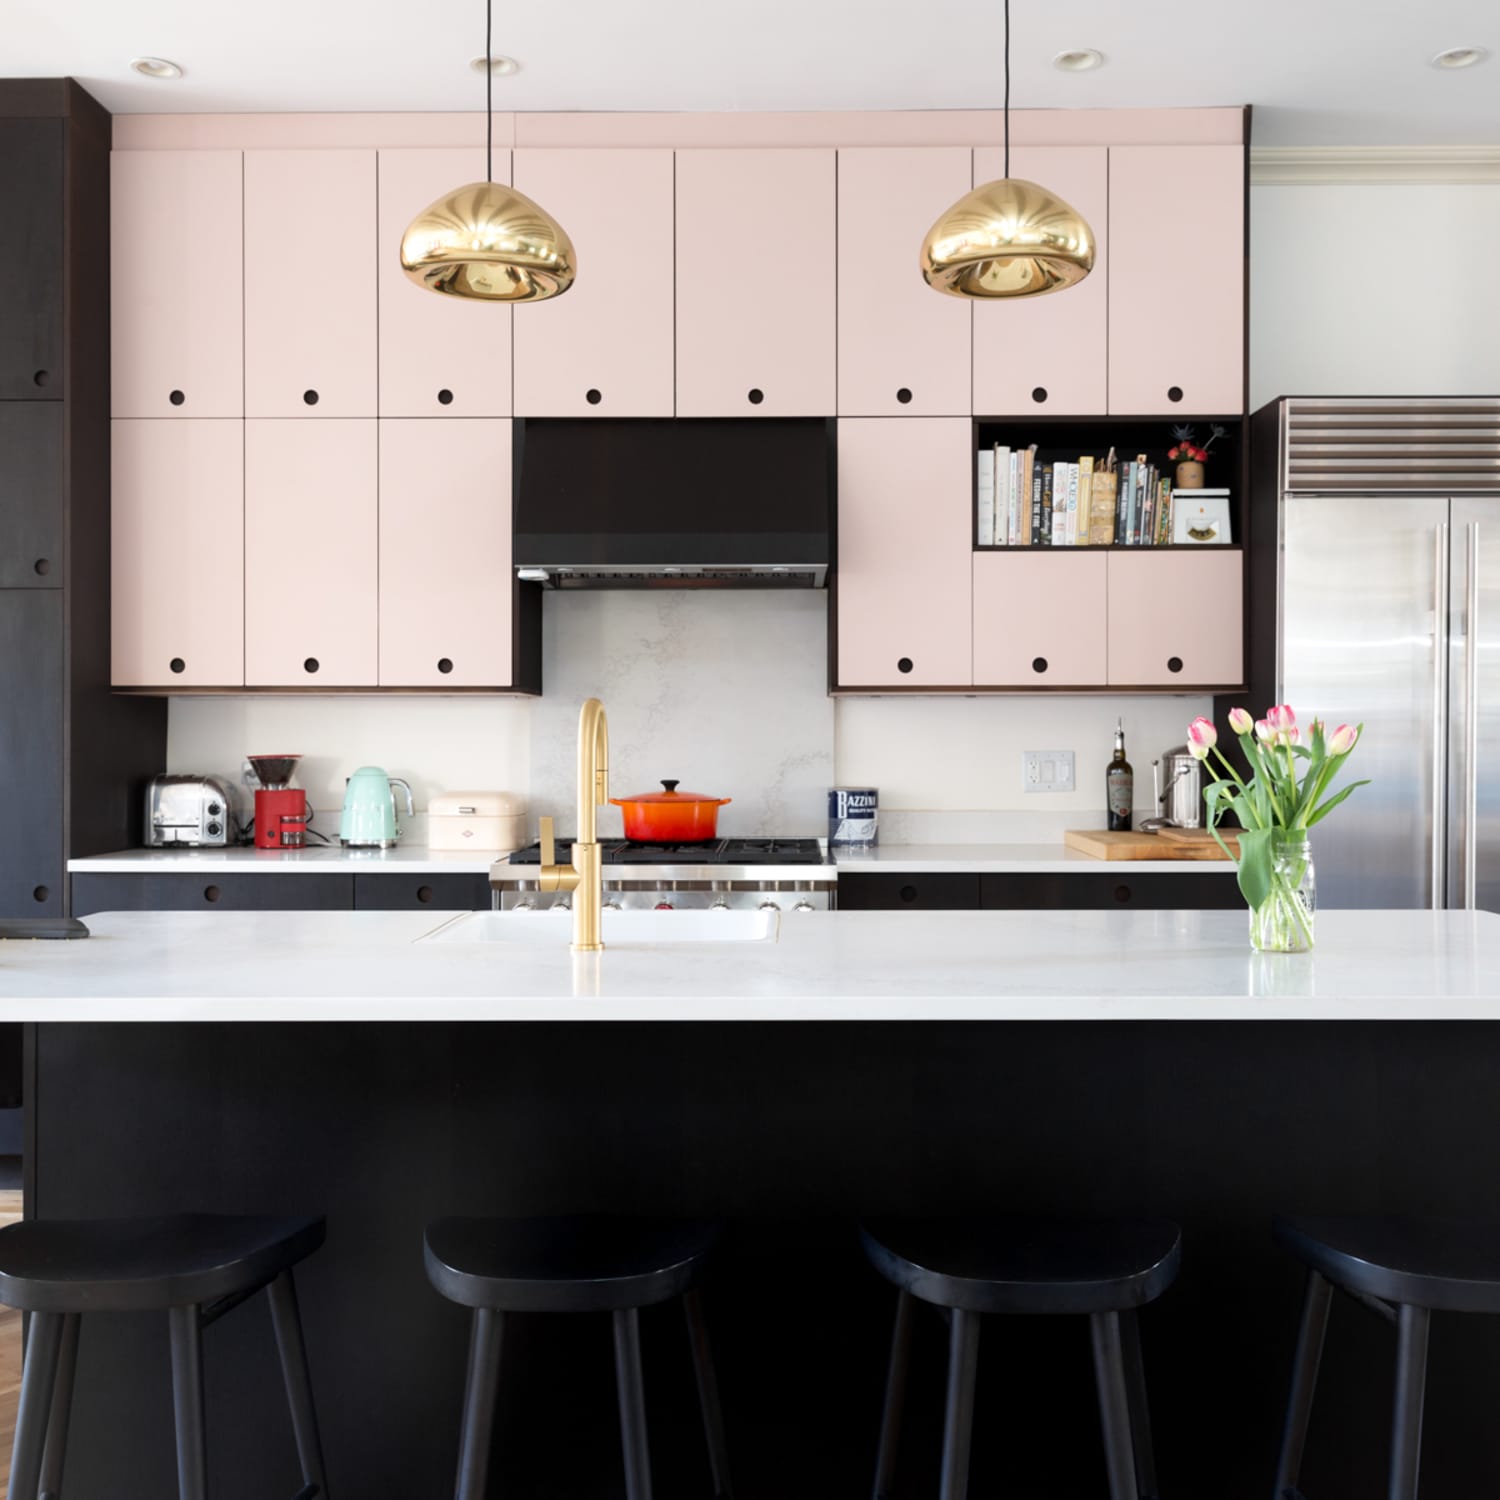 7 Low-Cost (or Free!) Kitchen Staging Ideas Professionals Swear By